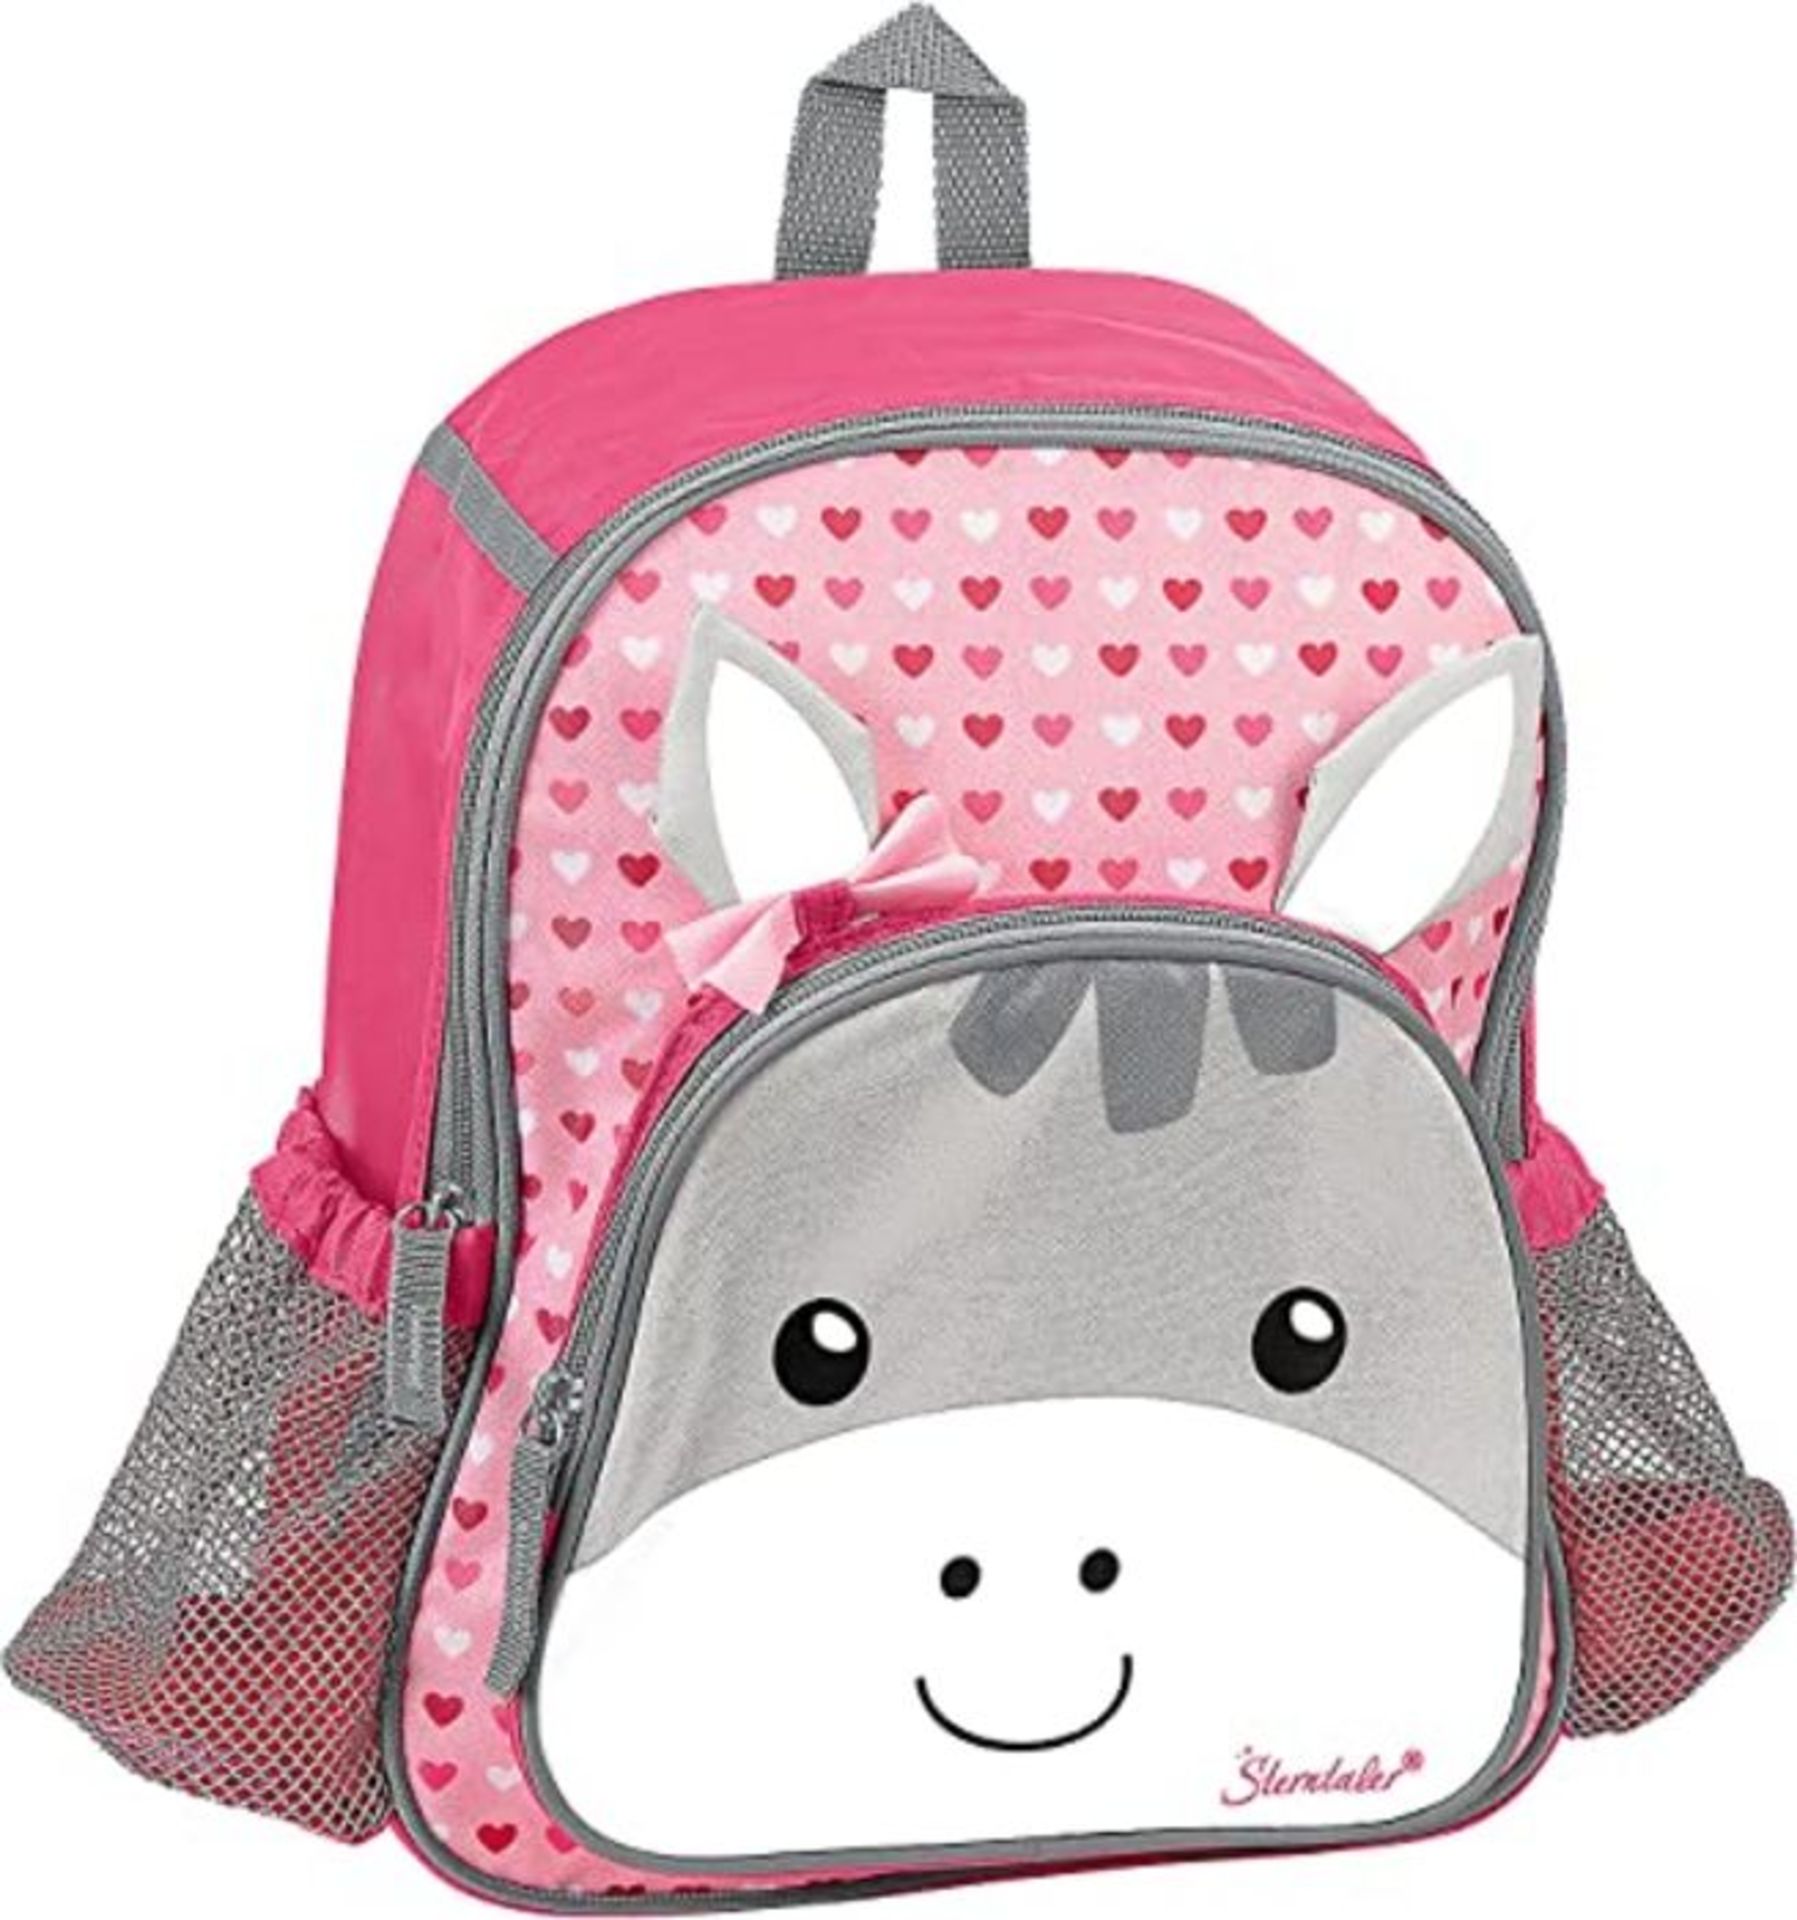 Sterntaler Functional Backpack, Emmi Girl the Donkey, Age: Children from 3 years upwar